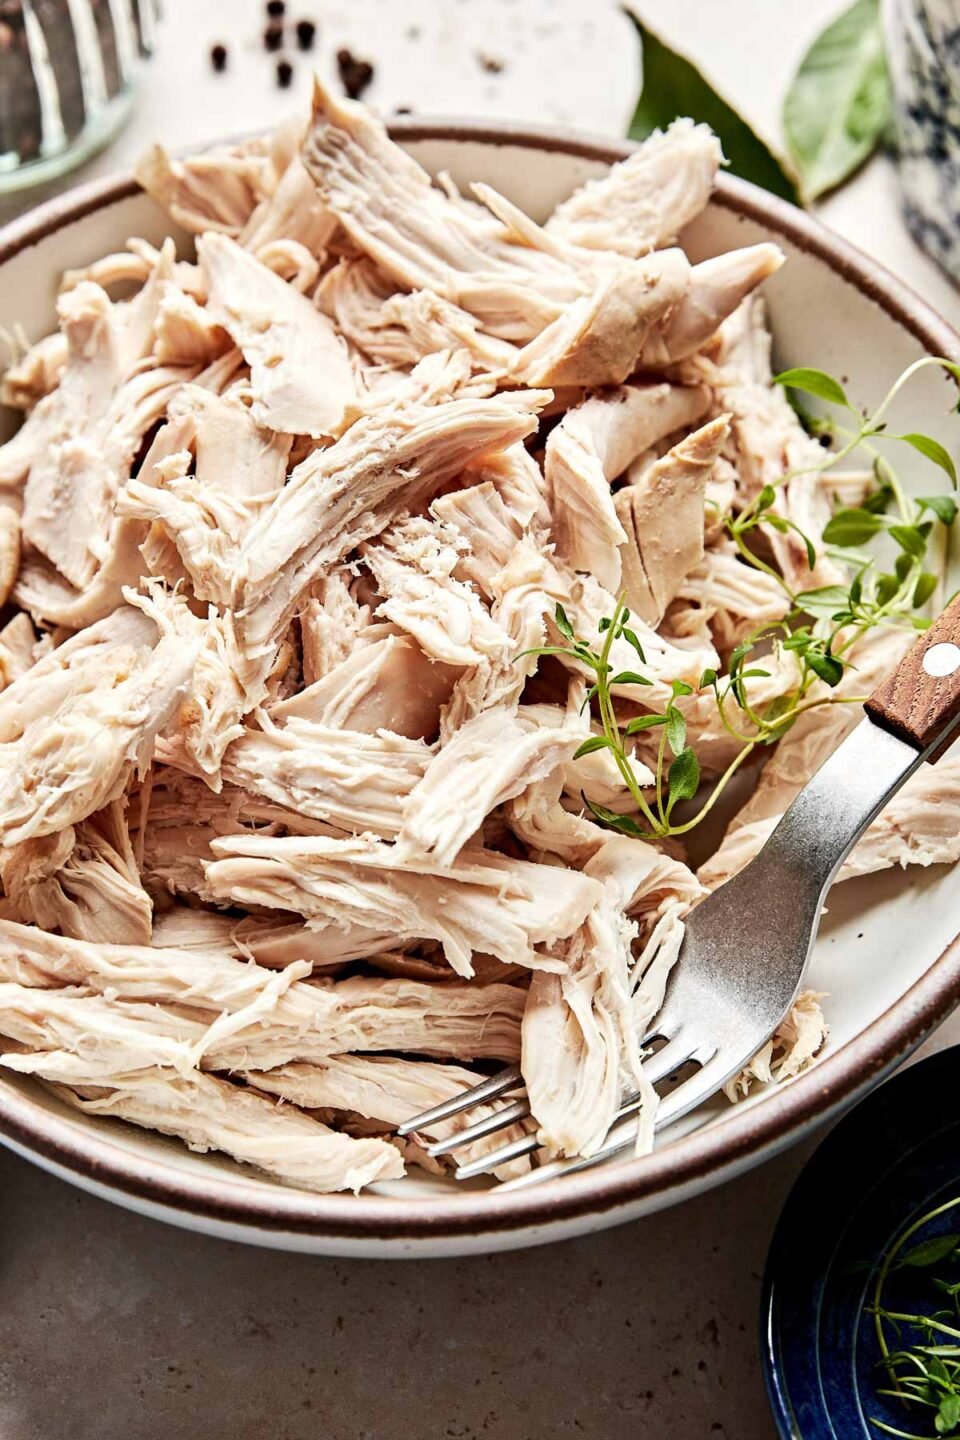 A close-up angled shot of a shallow stoneware bowl of shredded chicken. A sprig of thyme sits atop the chicken, and a small blue dish of herbs sits alongside the bowl.